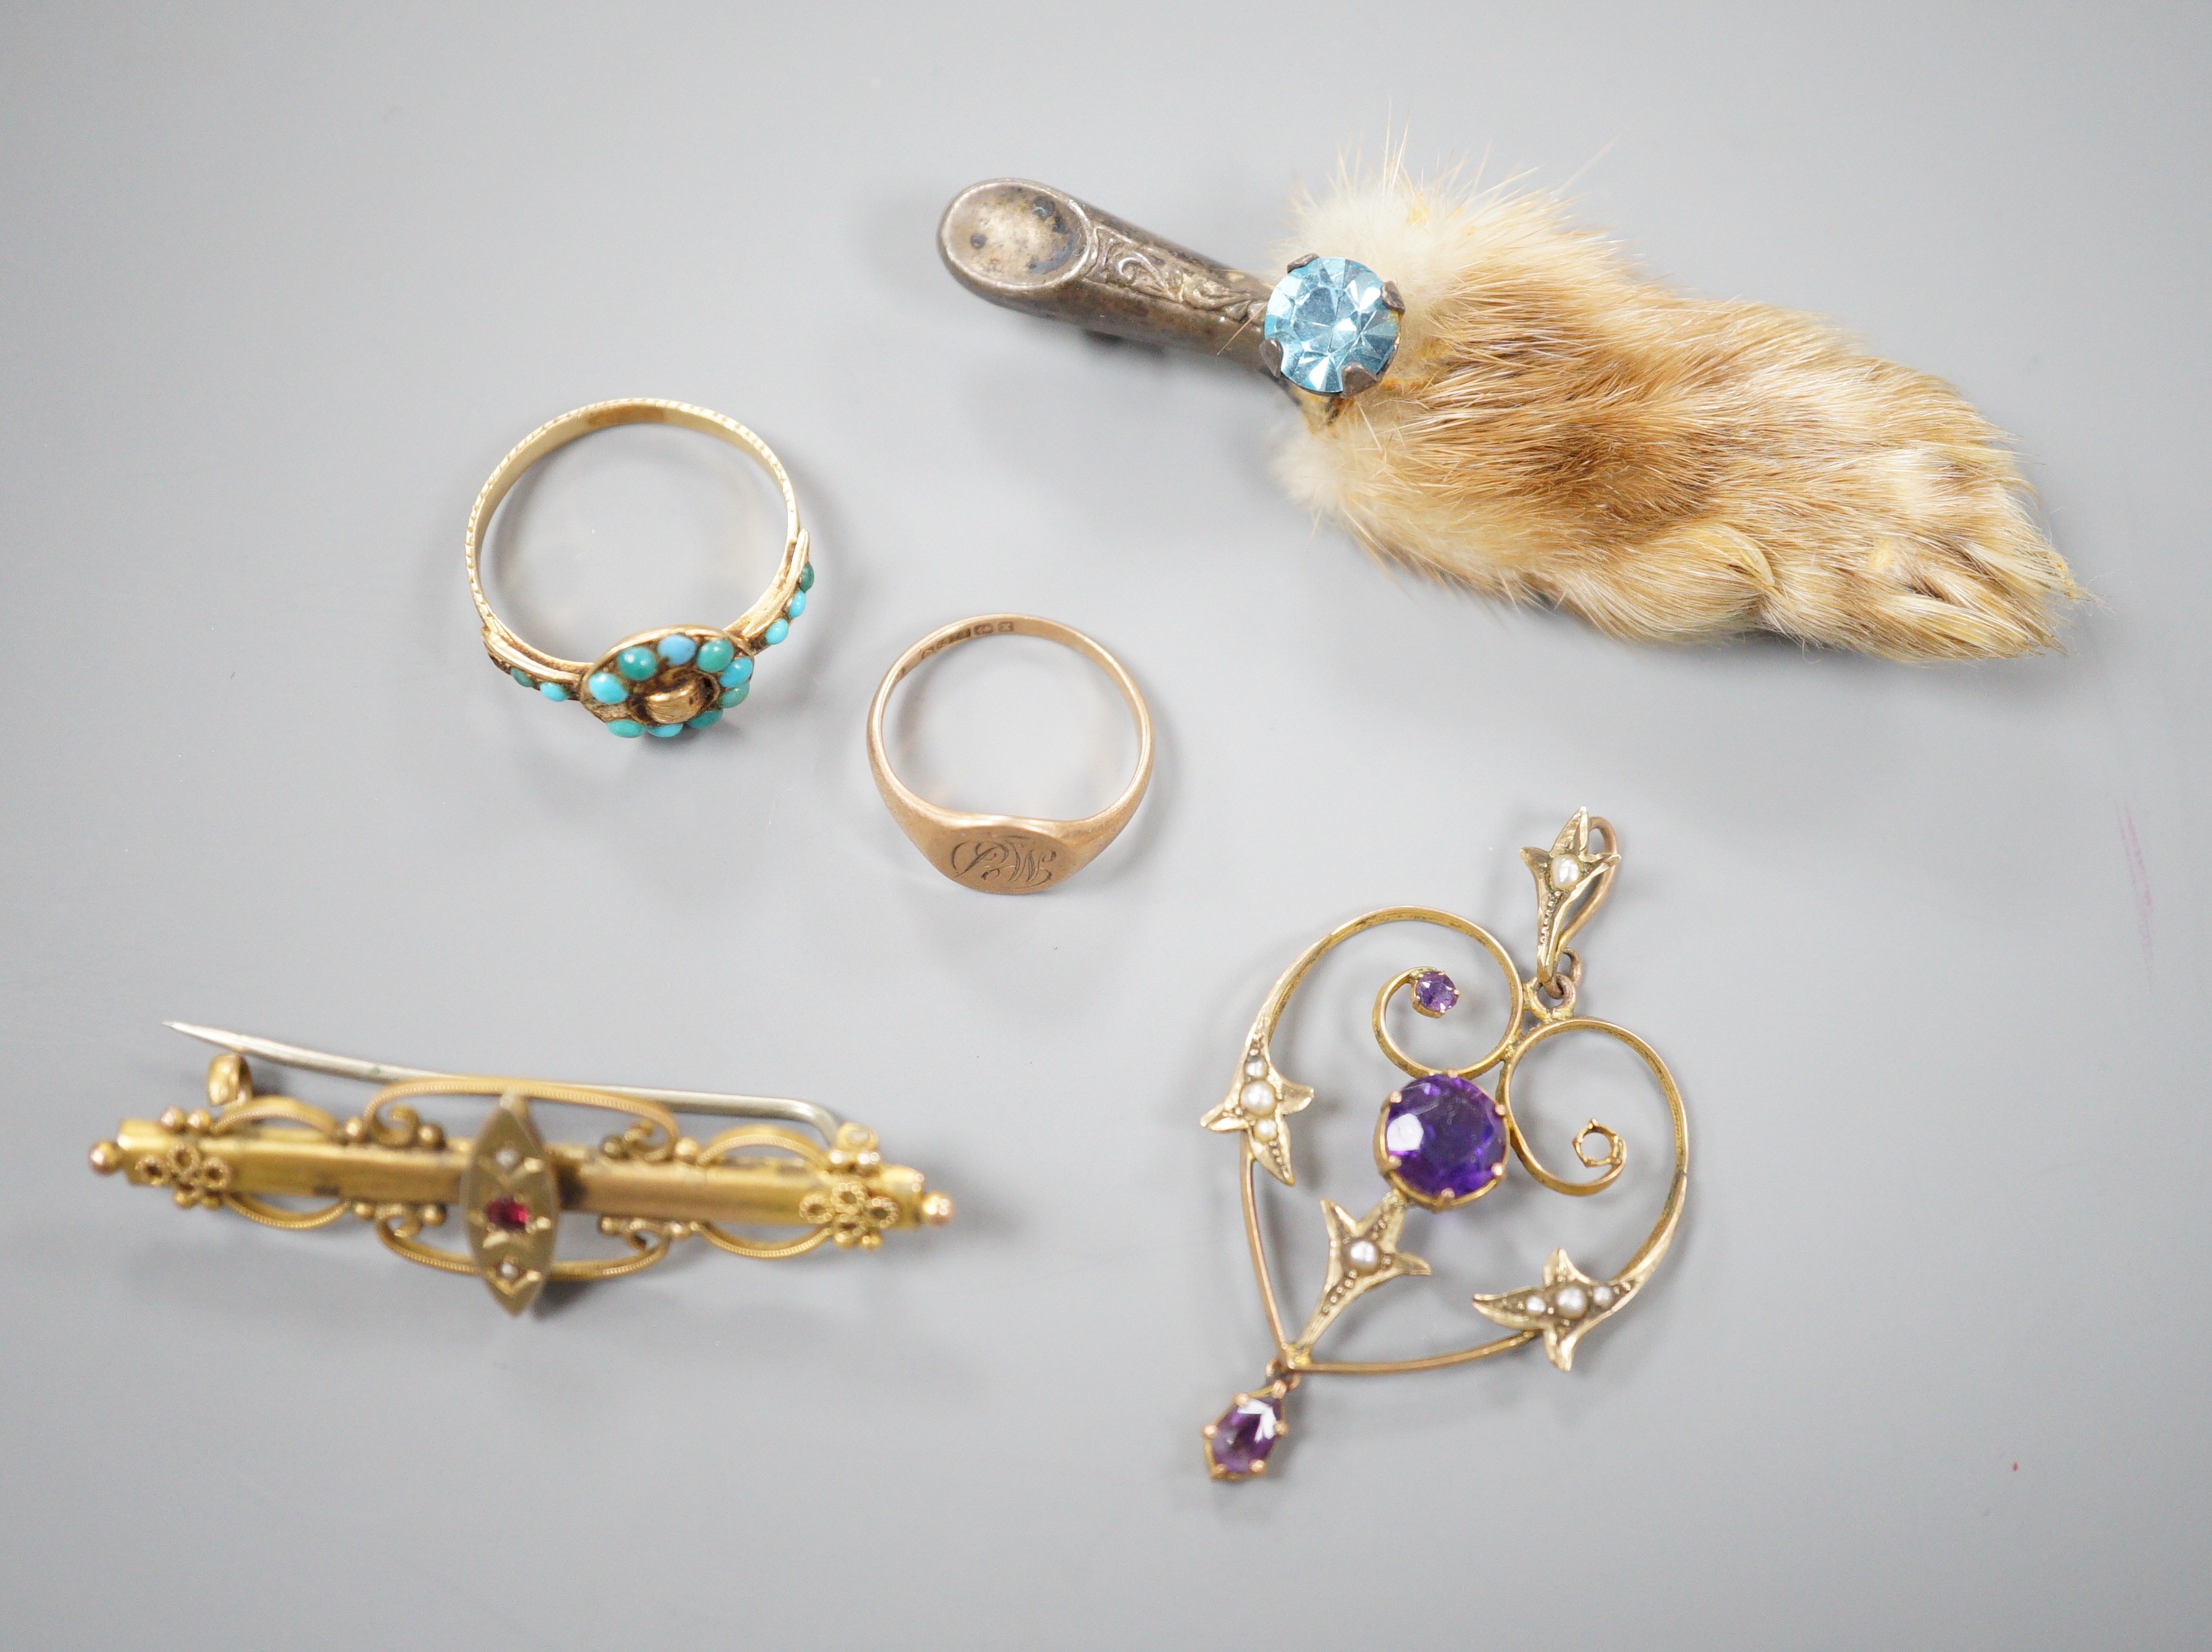 A small collection of jewellery to include an Edwardian amethyst and seed pearl pendant, two rings including Victorian yellow metal and turquoise 'buckle' ring, a bar brooch and a paw brooch.